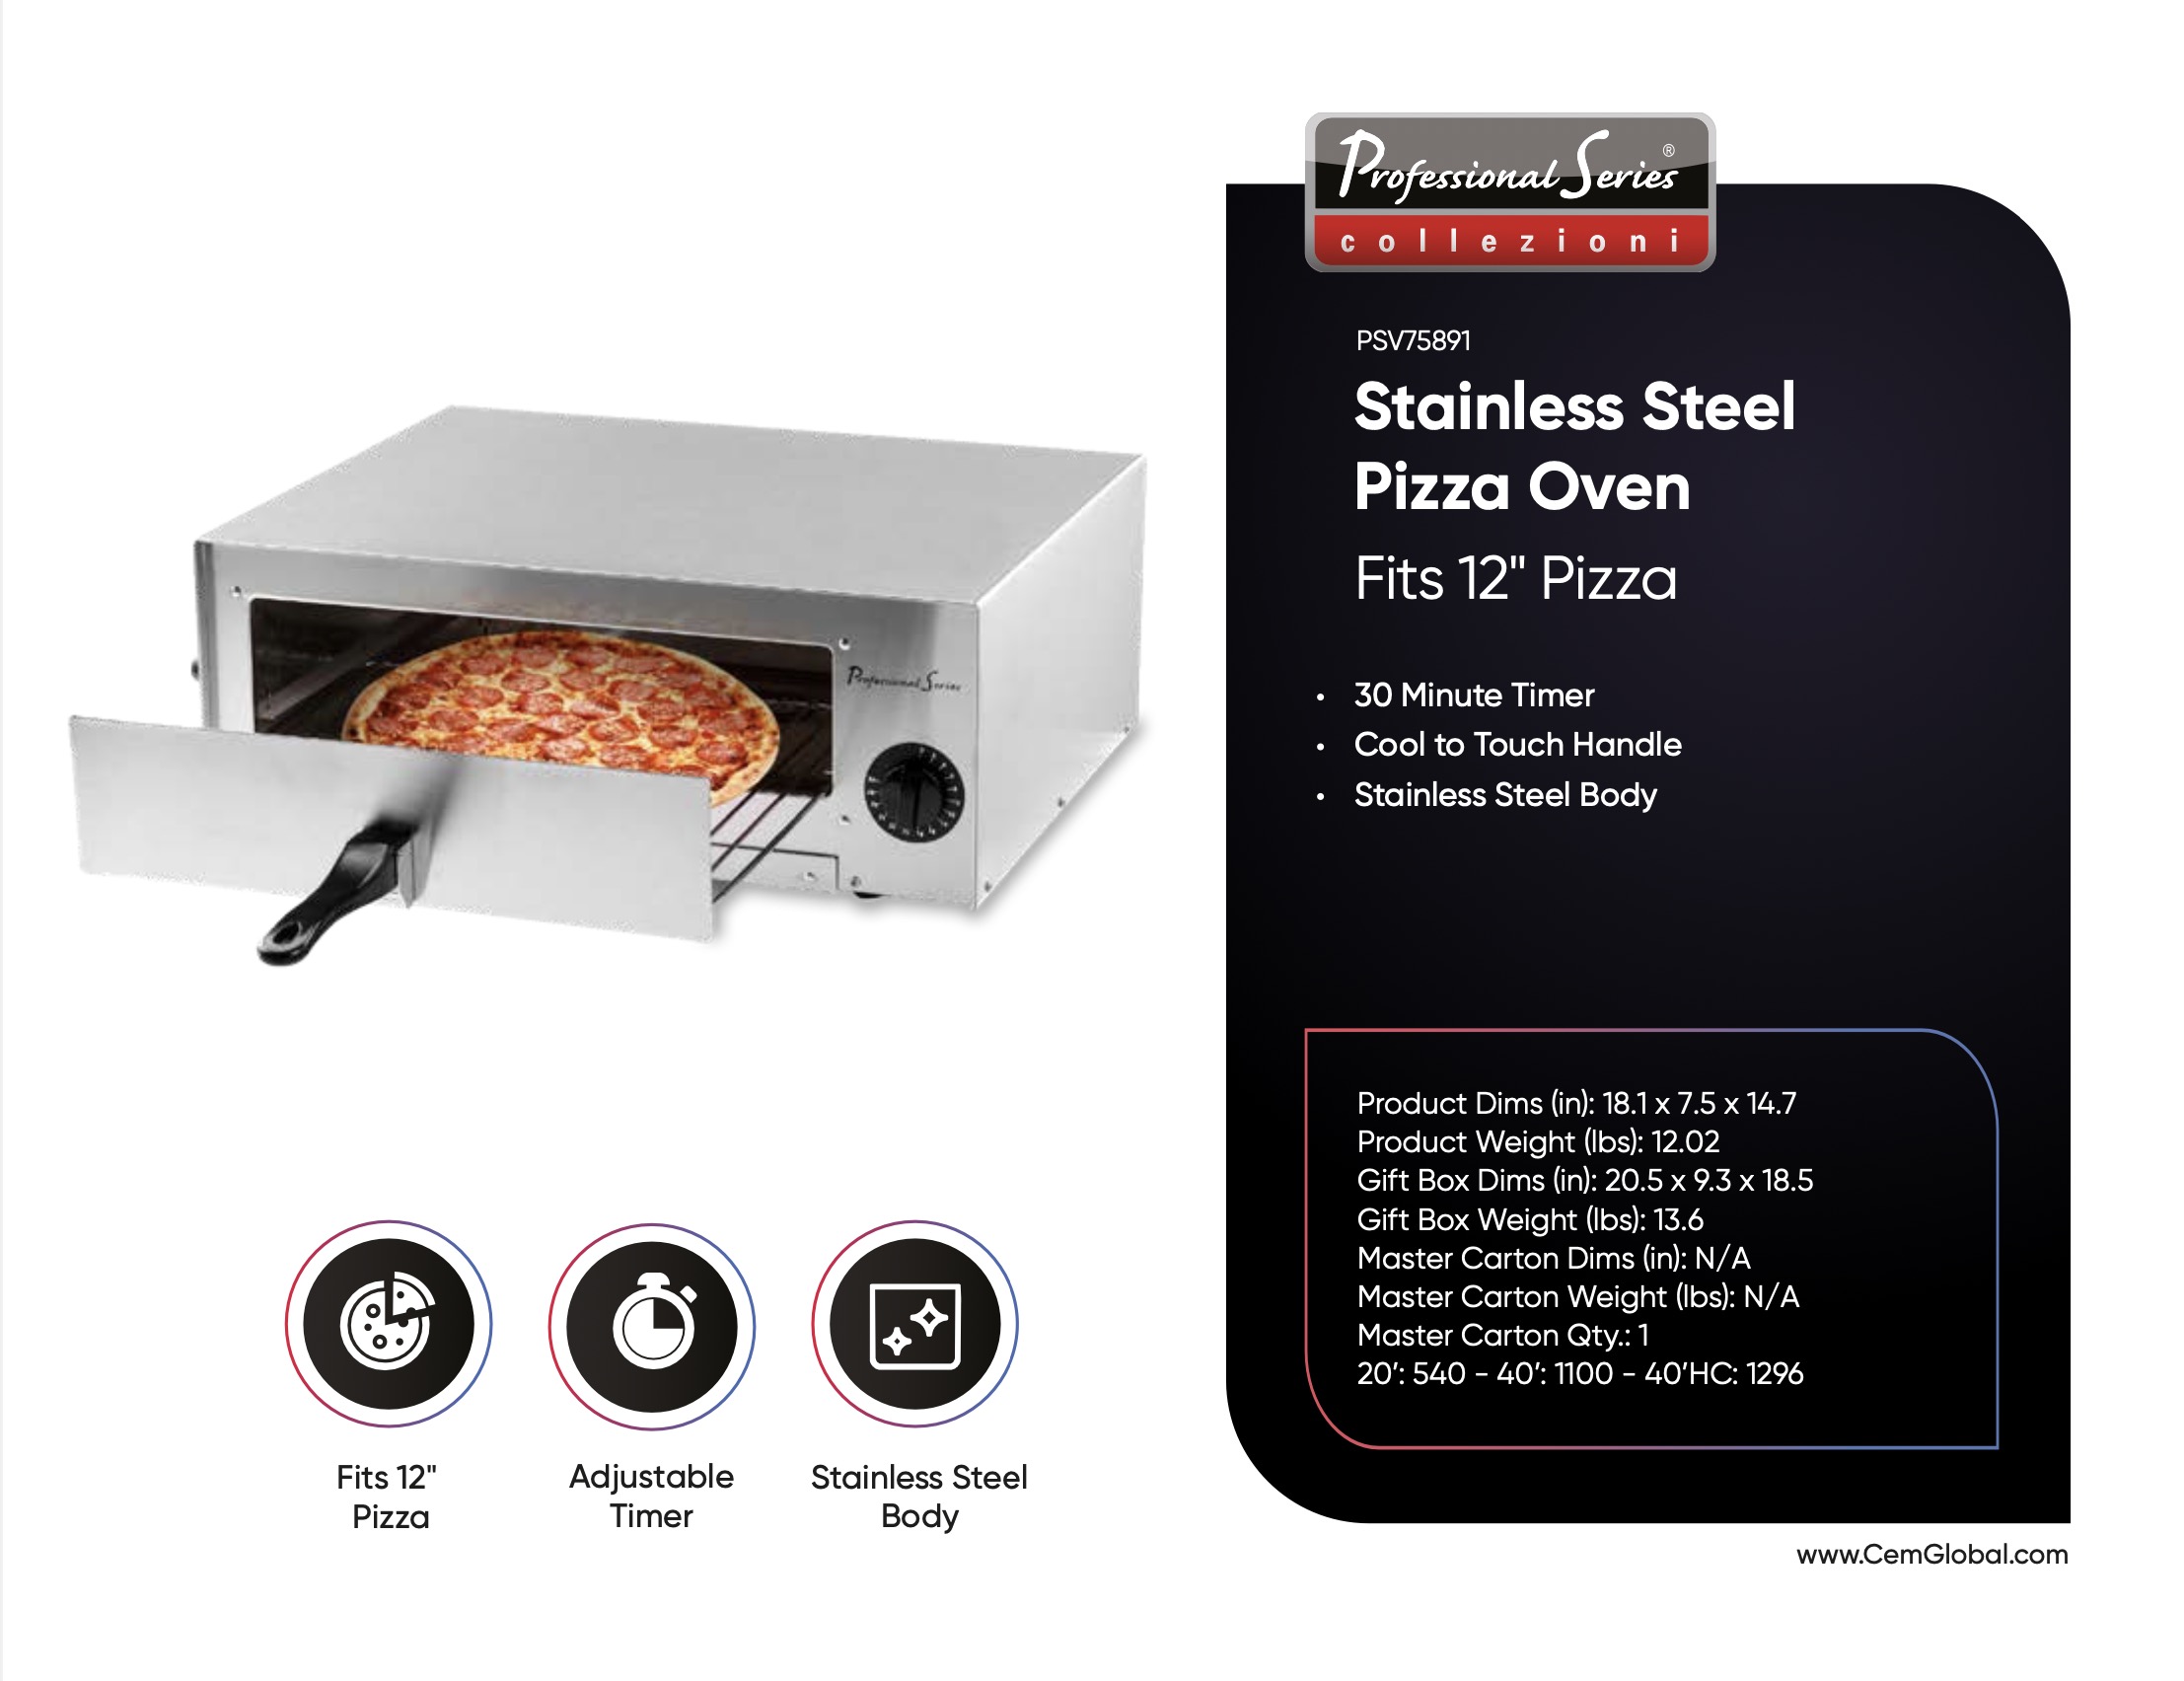 Stainless Steel Pizza Oven Fits 12"